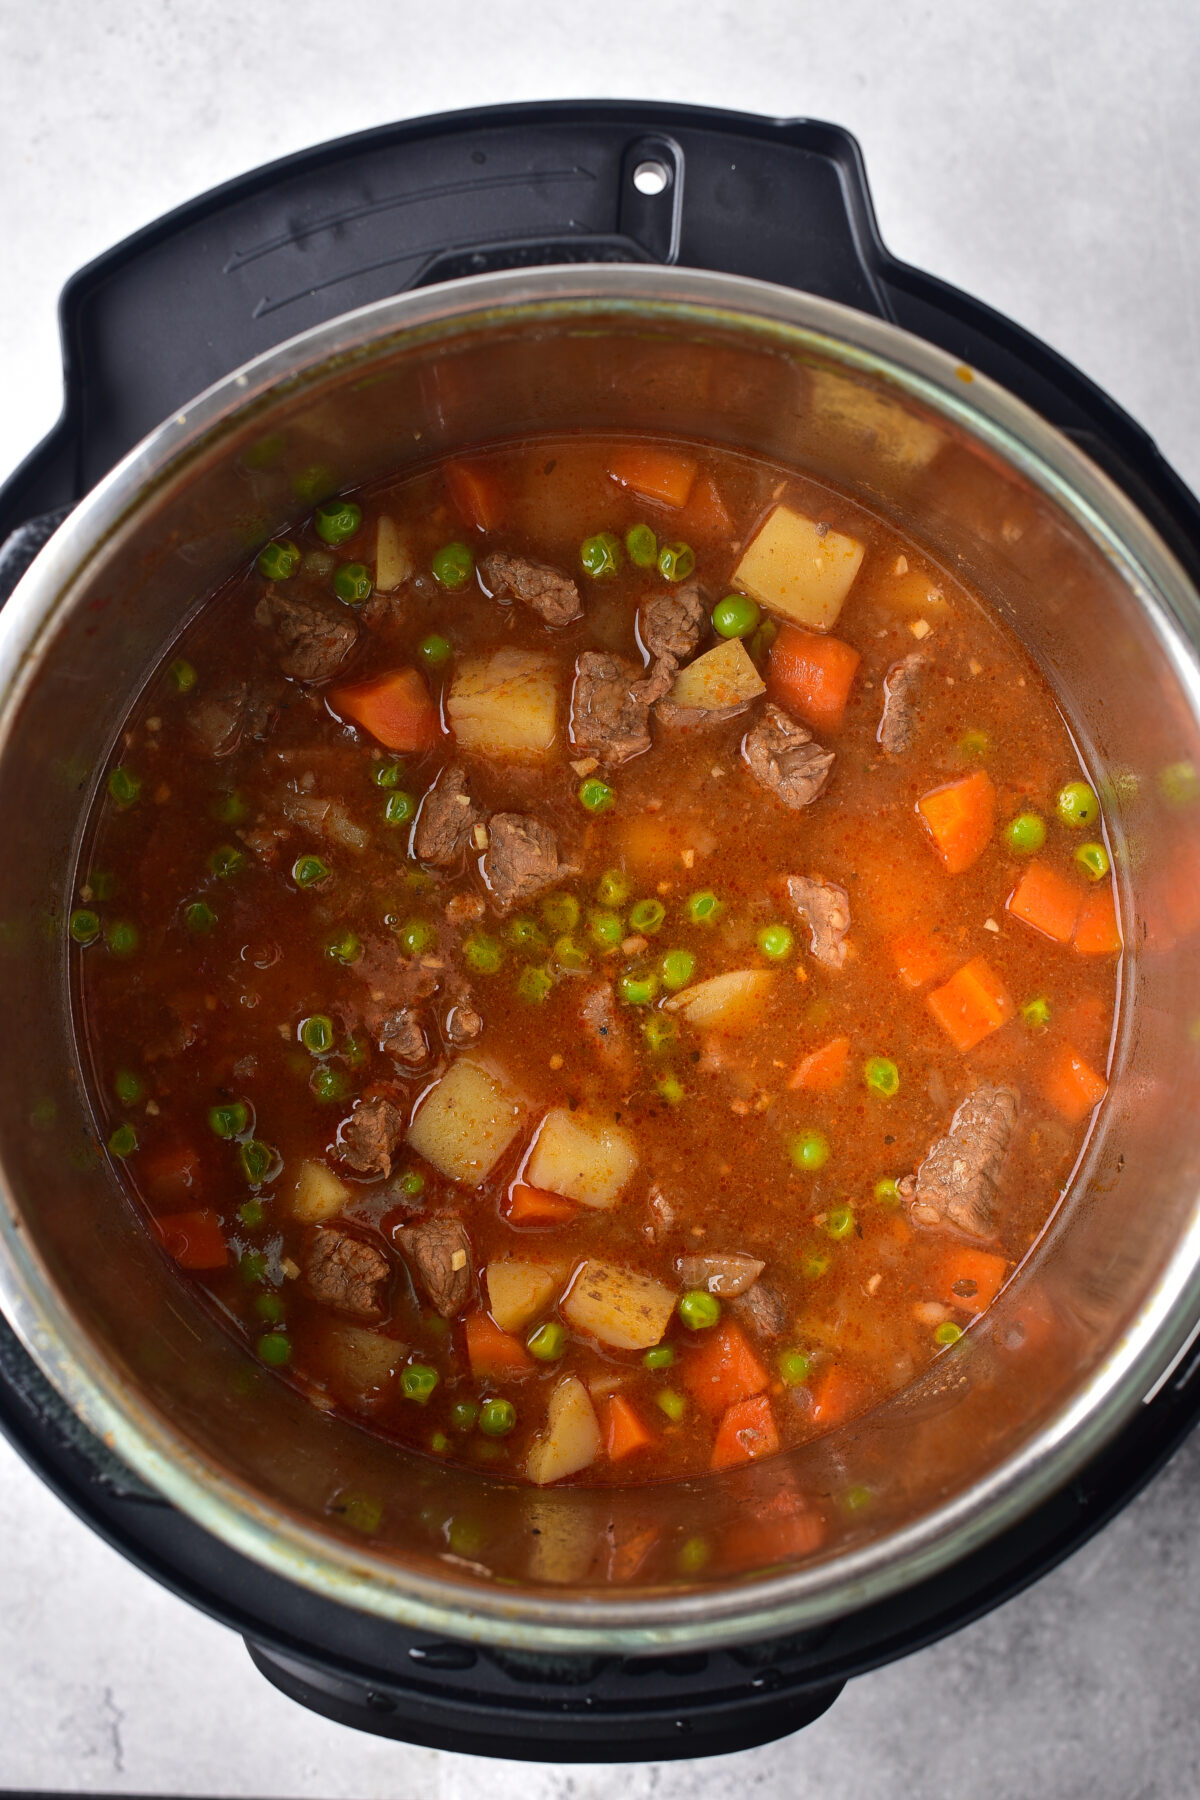 The stew ready to eat in the instant pot.